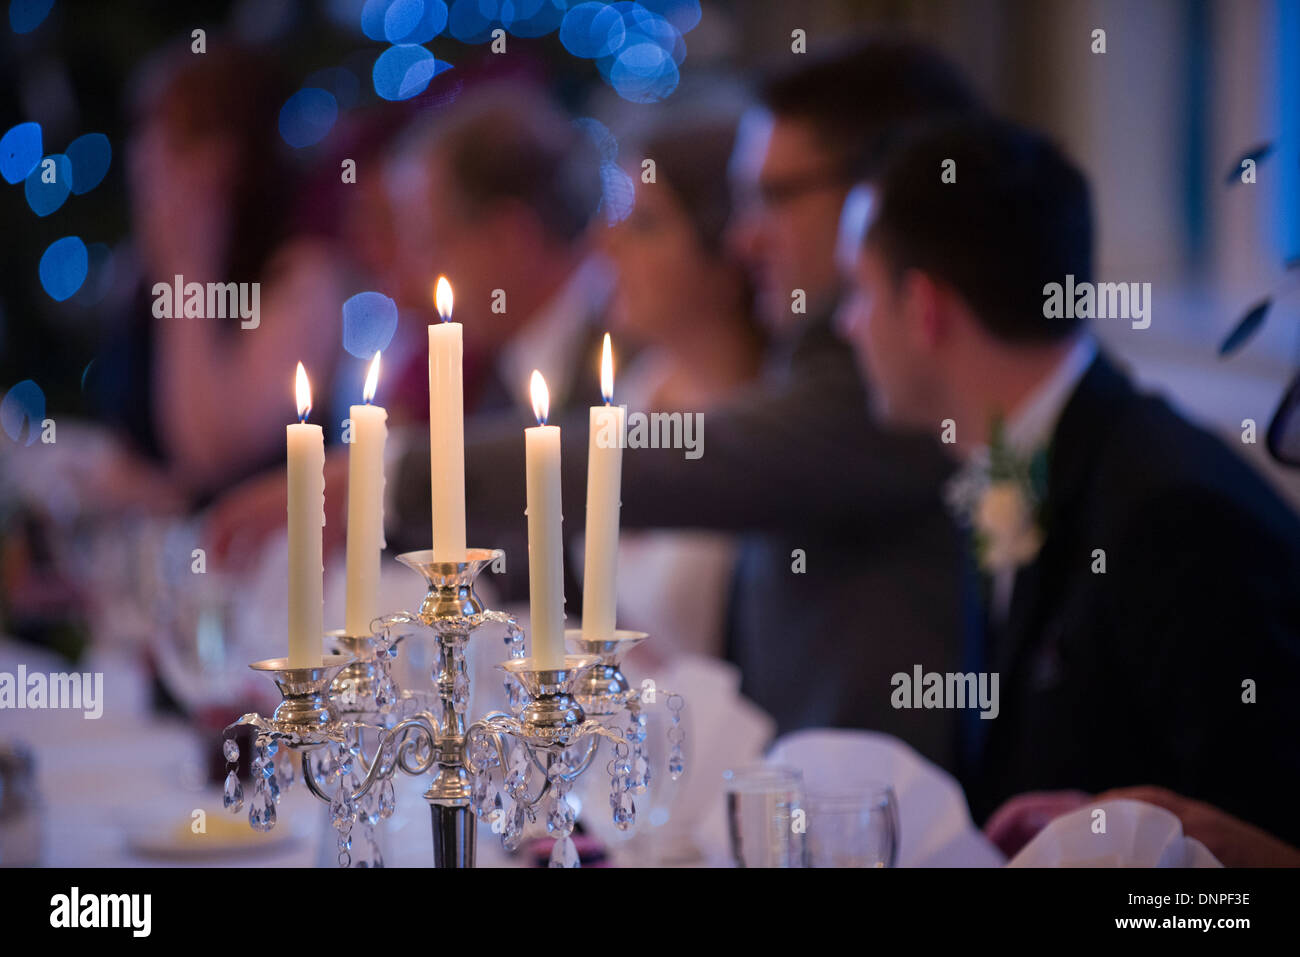 Candlestick at a wedding reception, function, occasion, bit of a do, people, happy, celebration, flame, danger, hazard Stock Photo